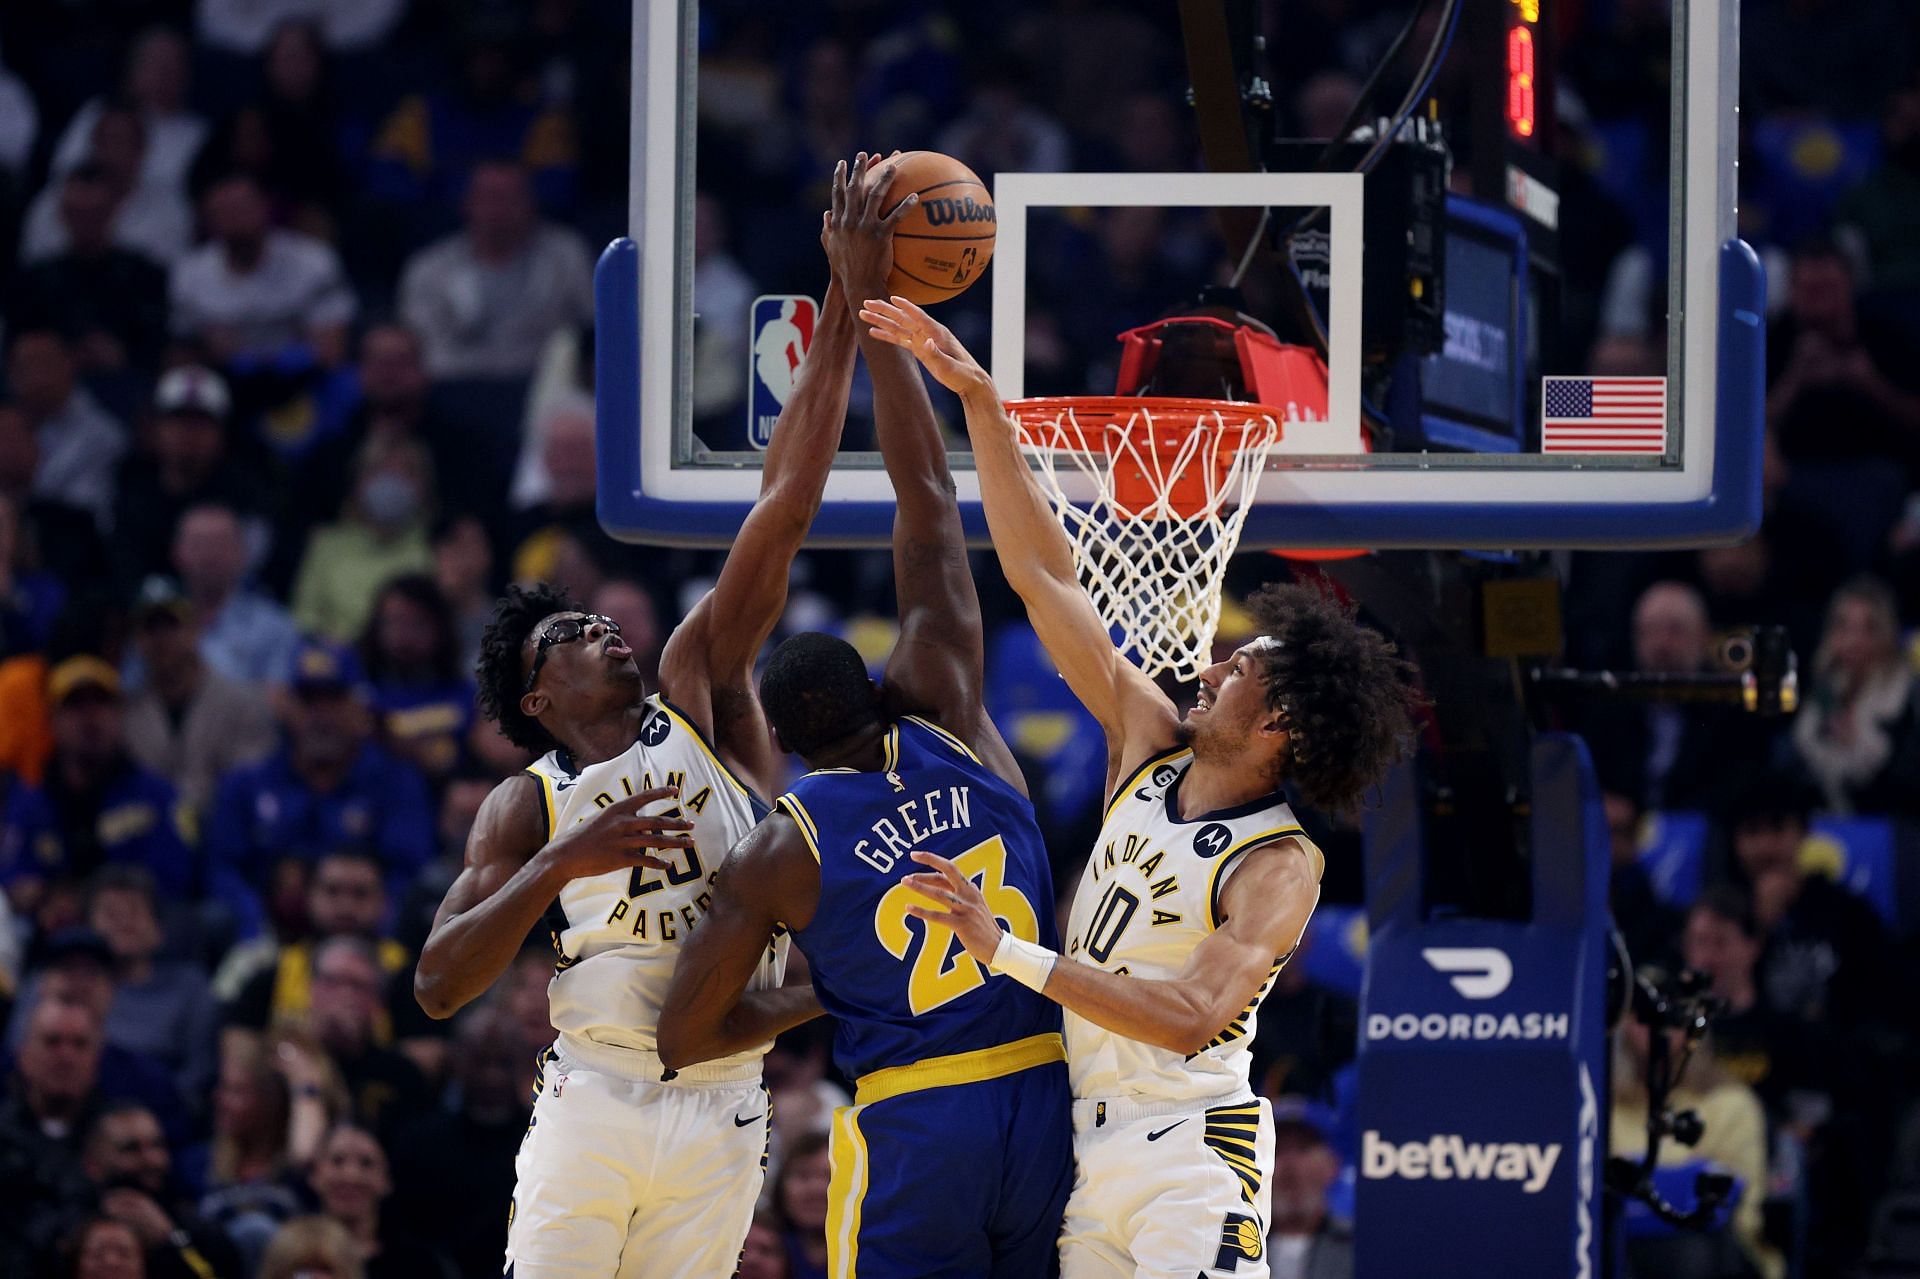 Indiana Pacers v Golden State Warriors